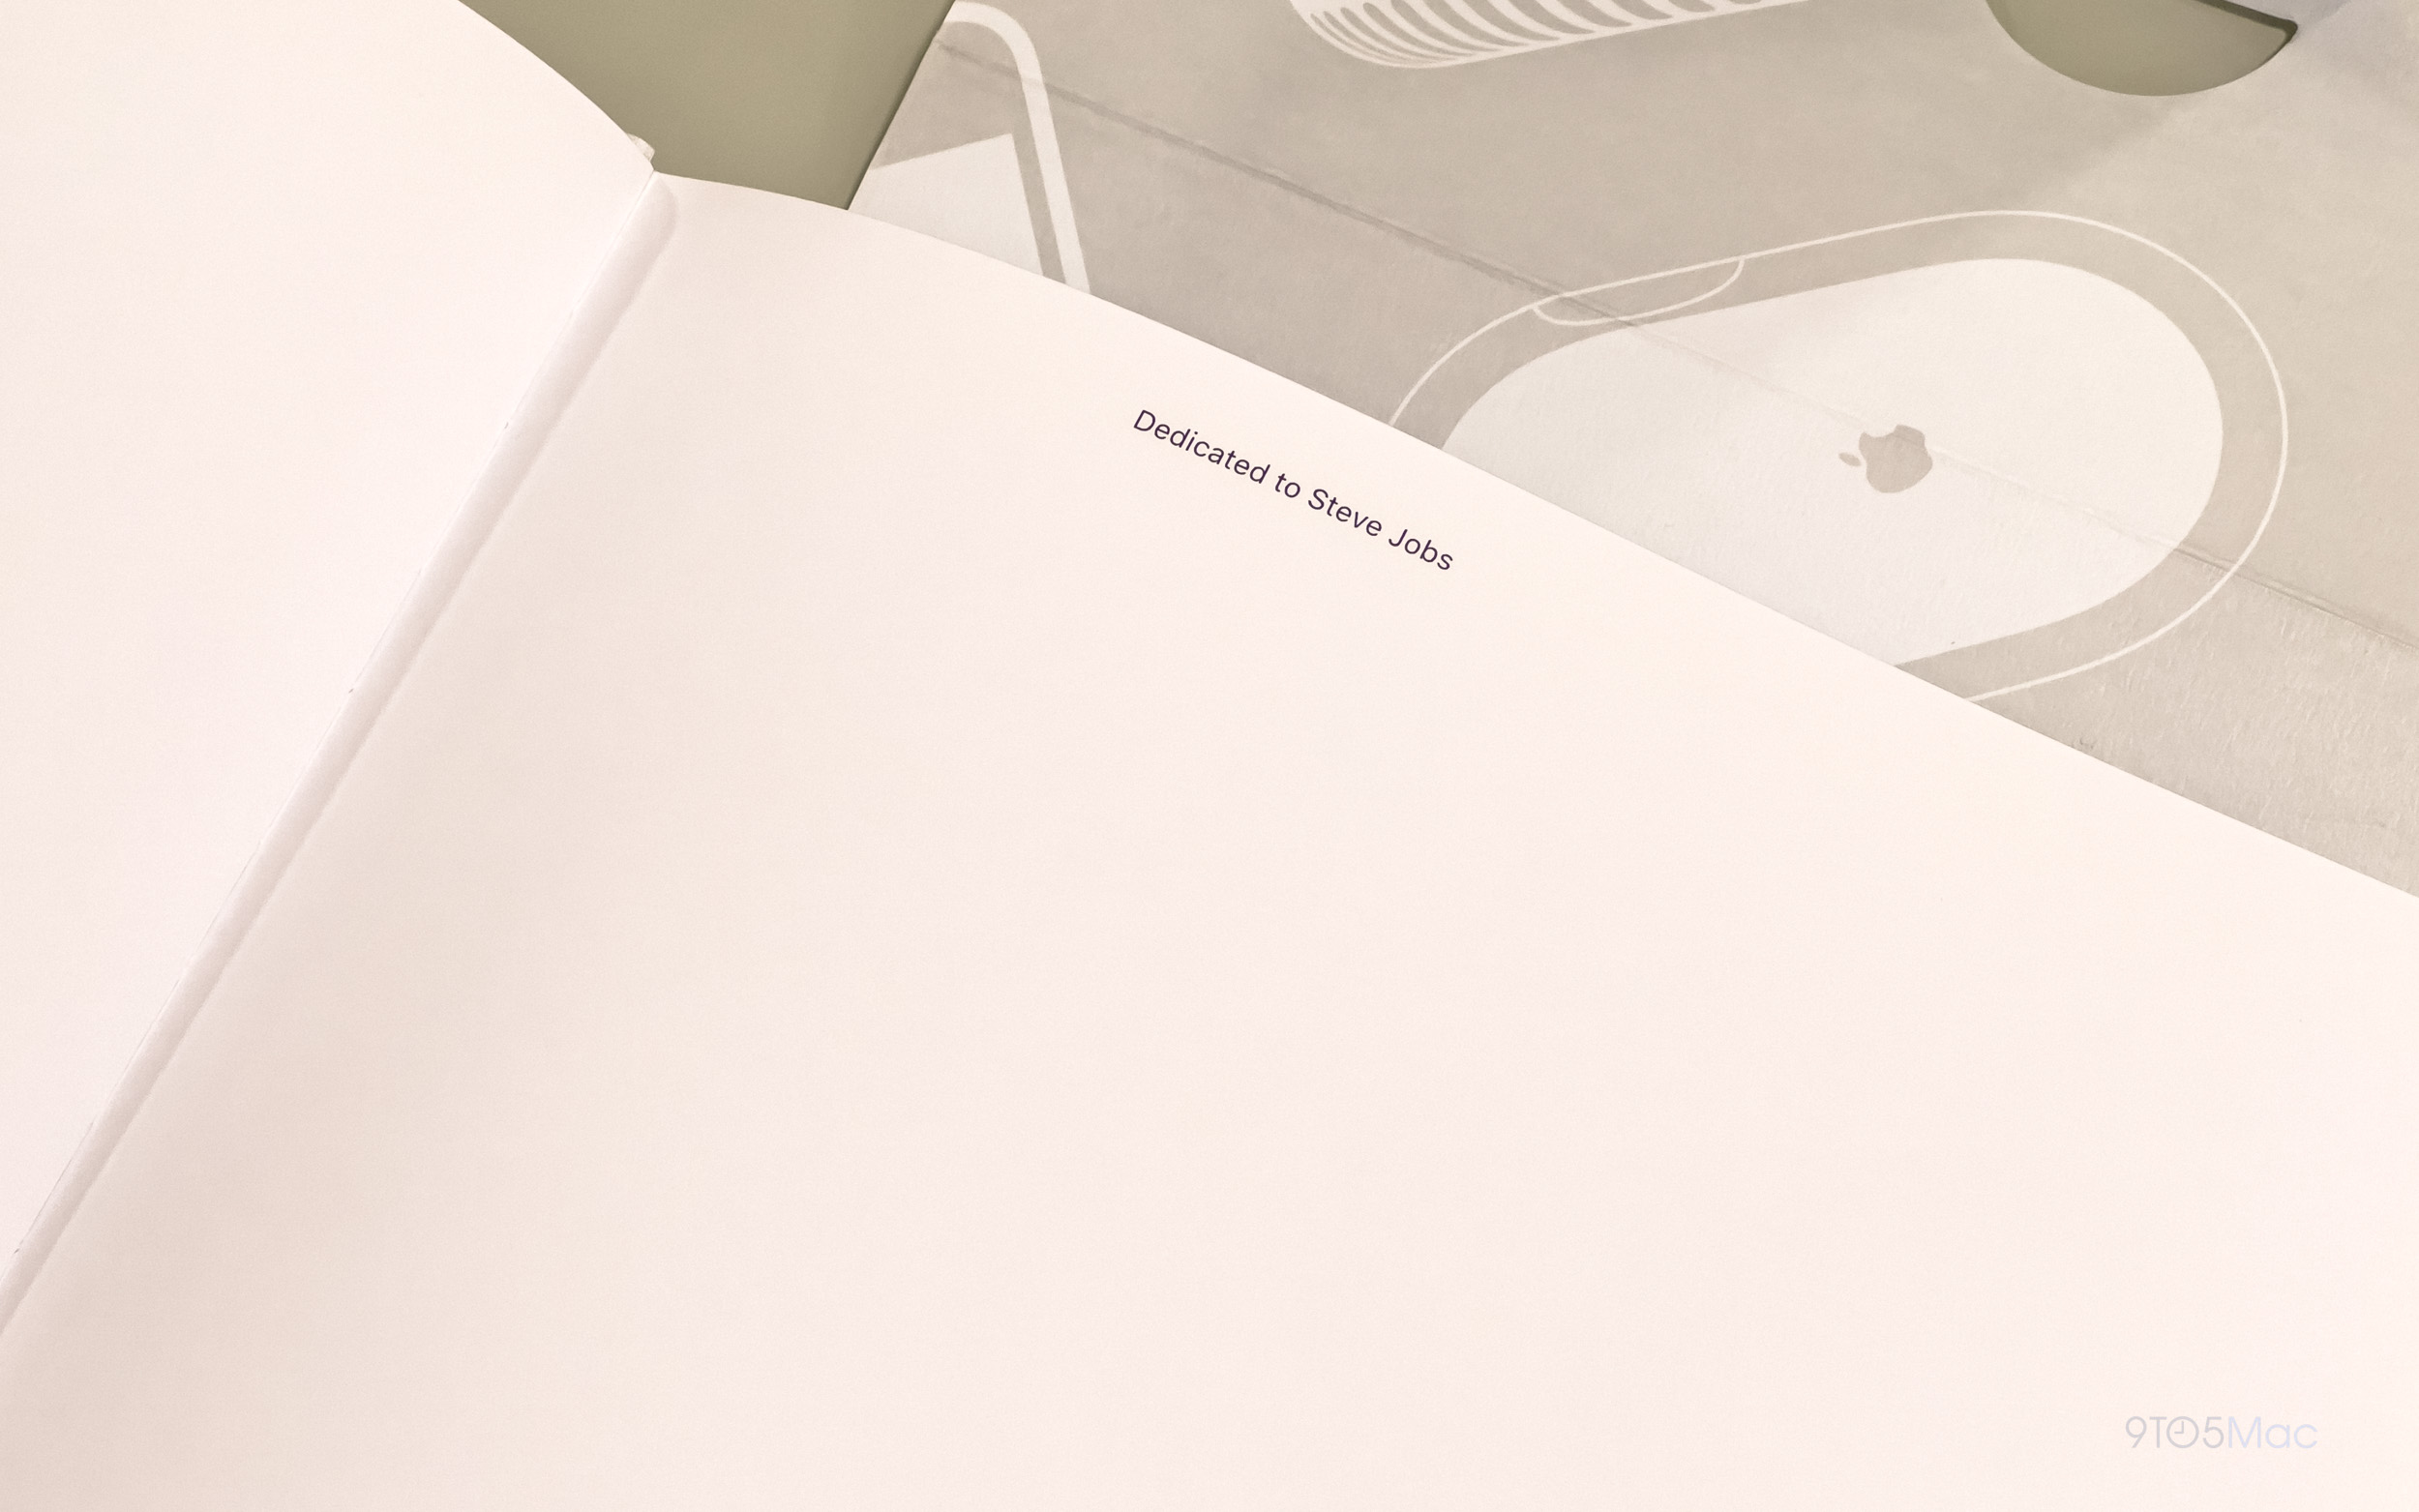 Three years ago, Apple stopped selling Jony Ive's book 'Designed by Apple in California.